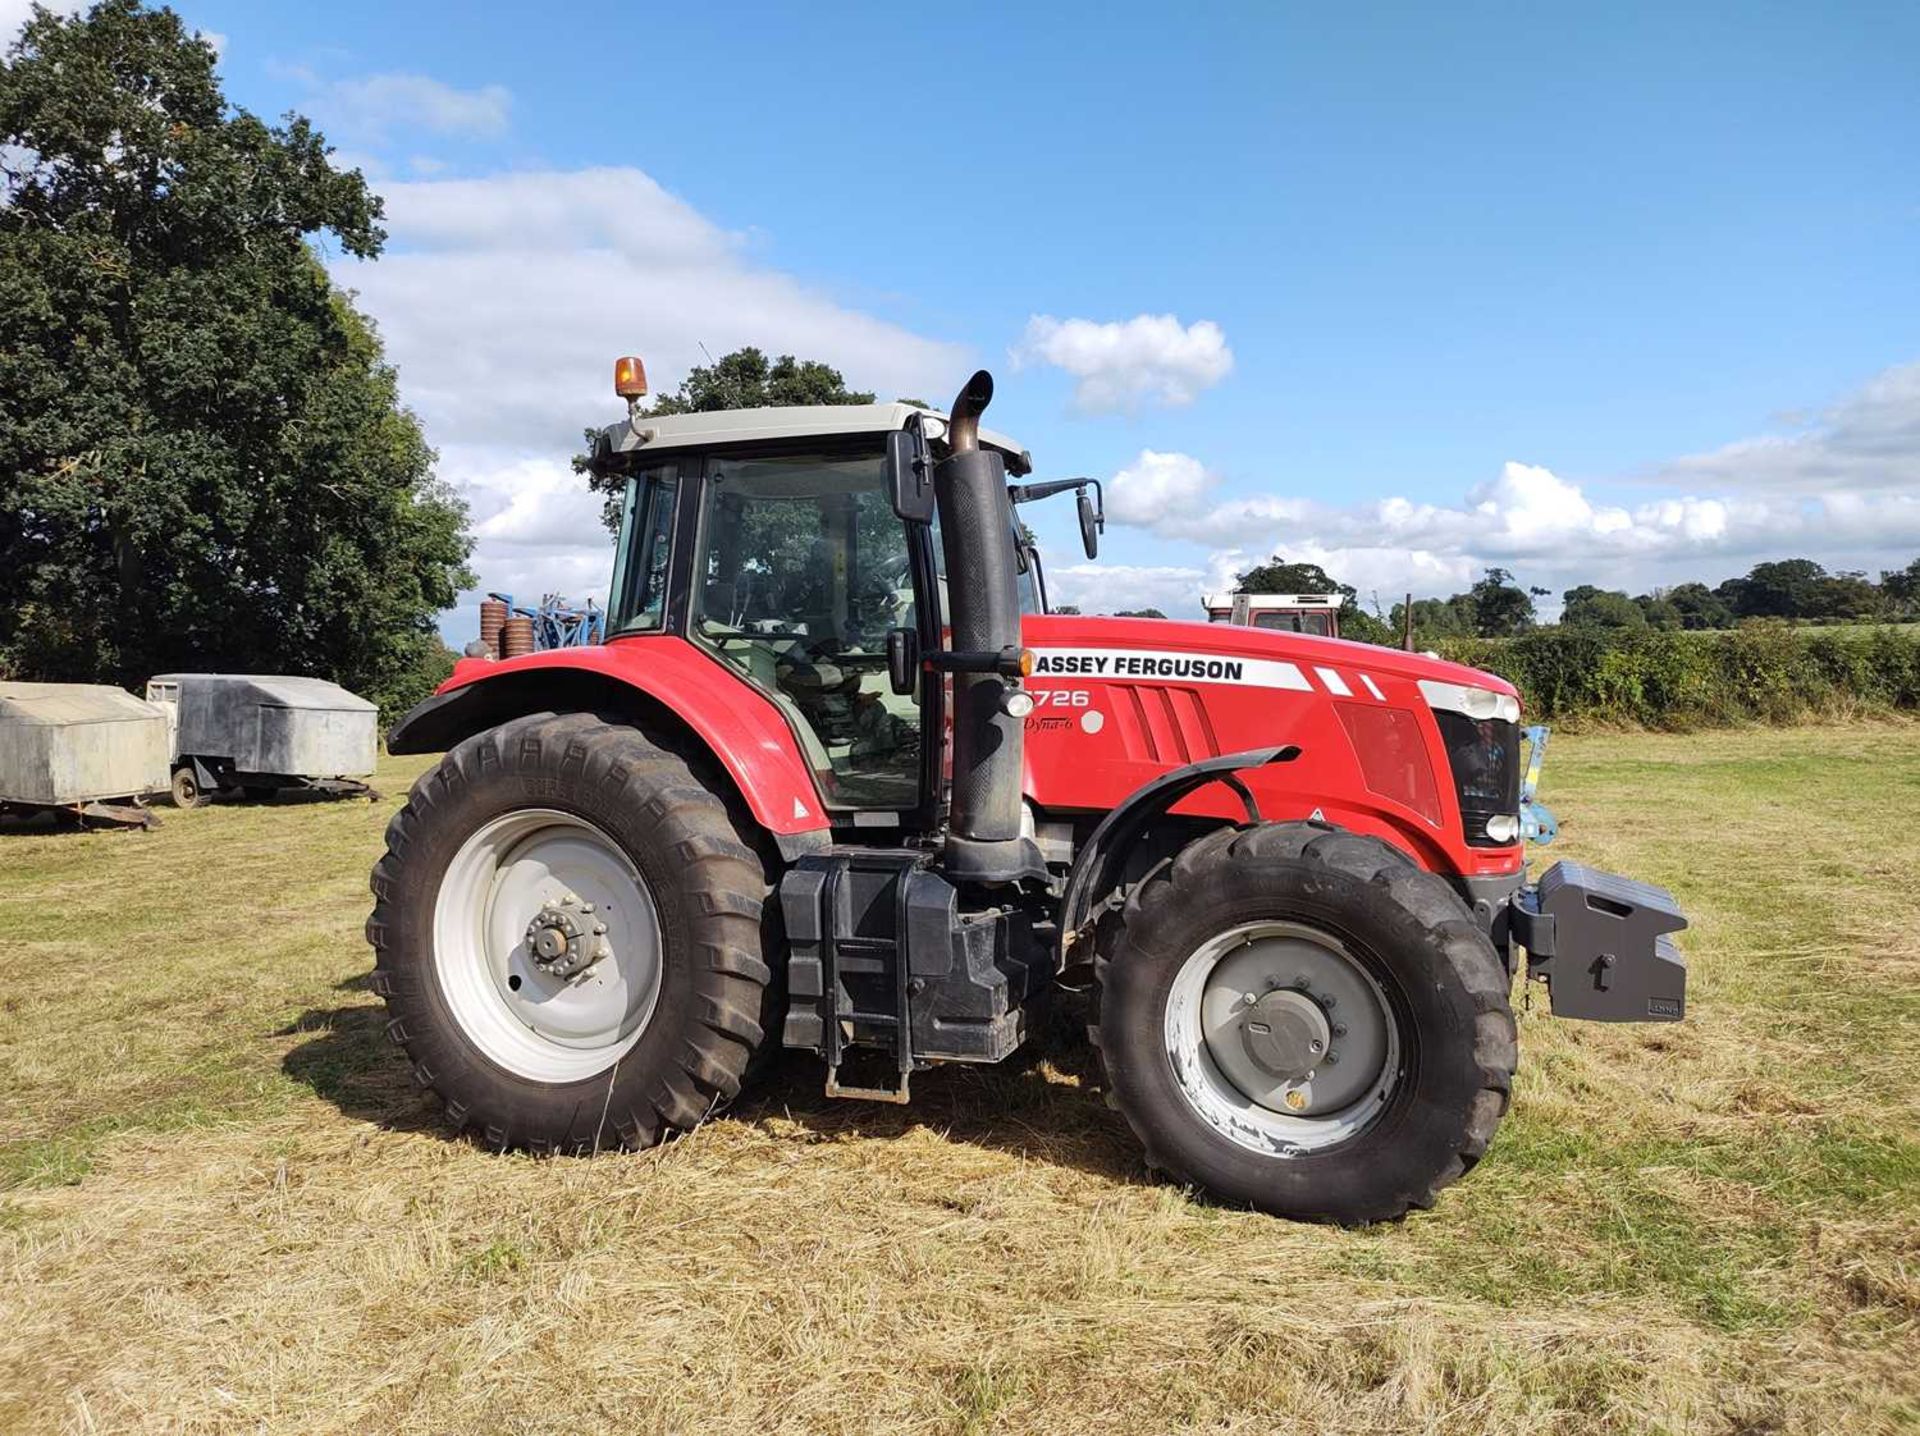 2018 Massey Ferguson 7726 Dyna 6 Approx. 4,250 Hrs 480/70 R30 620/70 R42 Tyres - Image 2 of 8